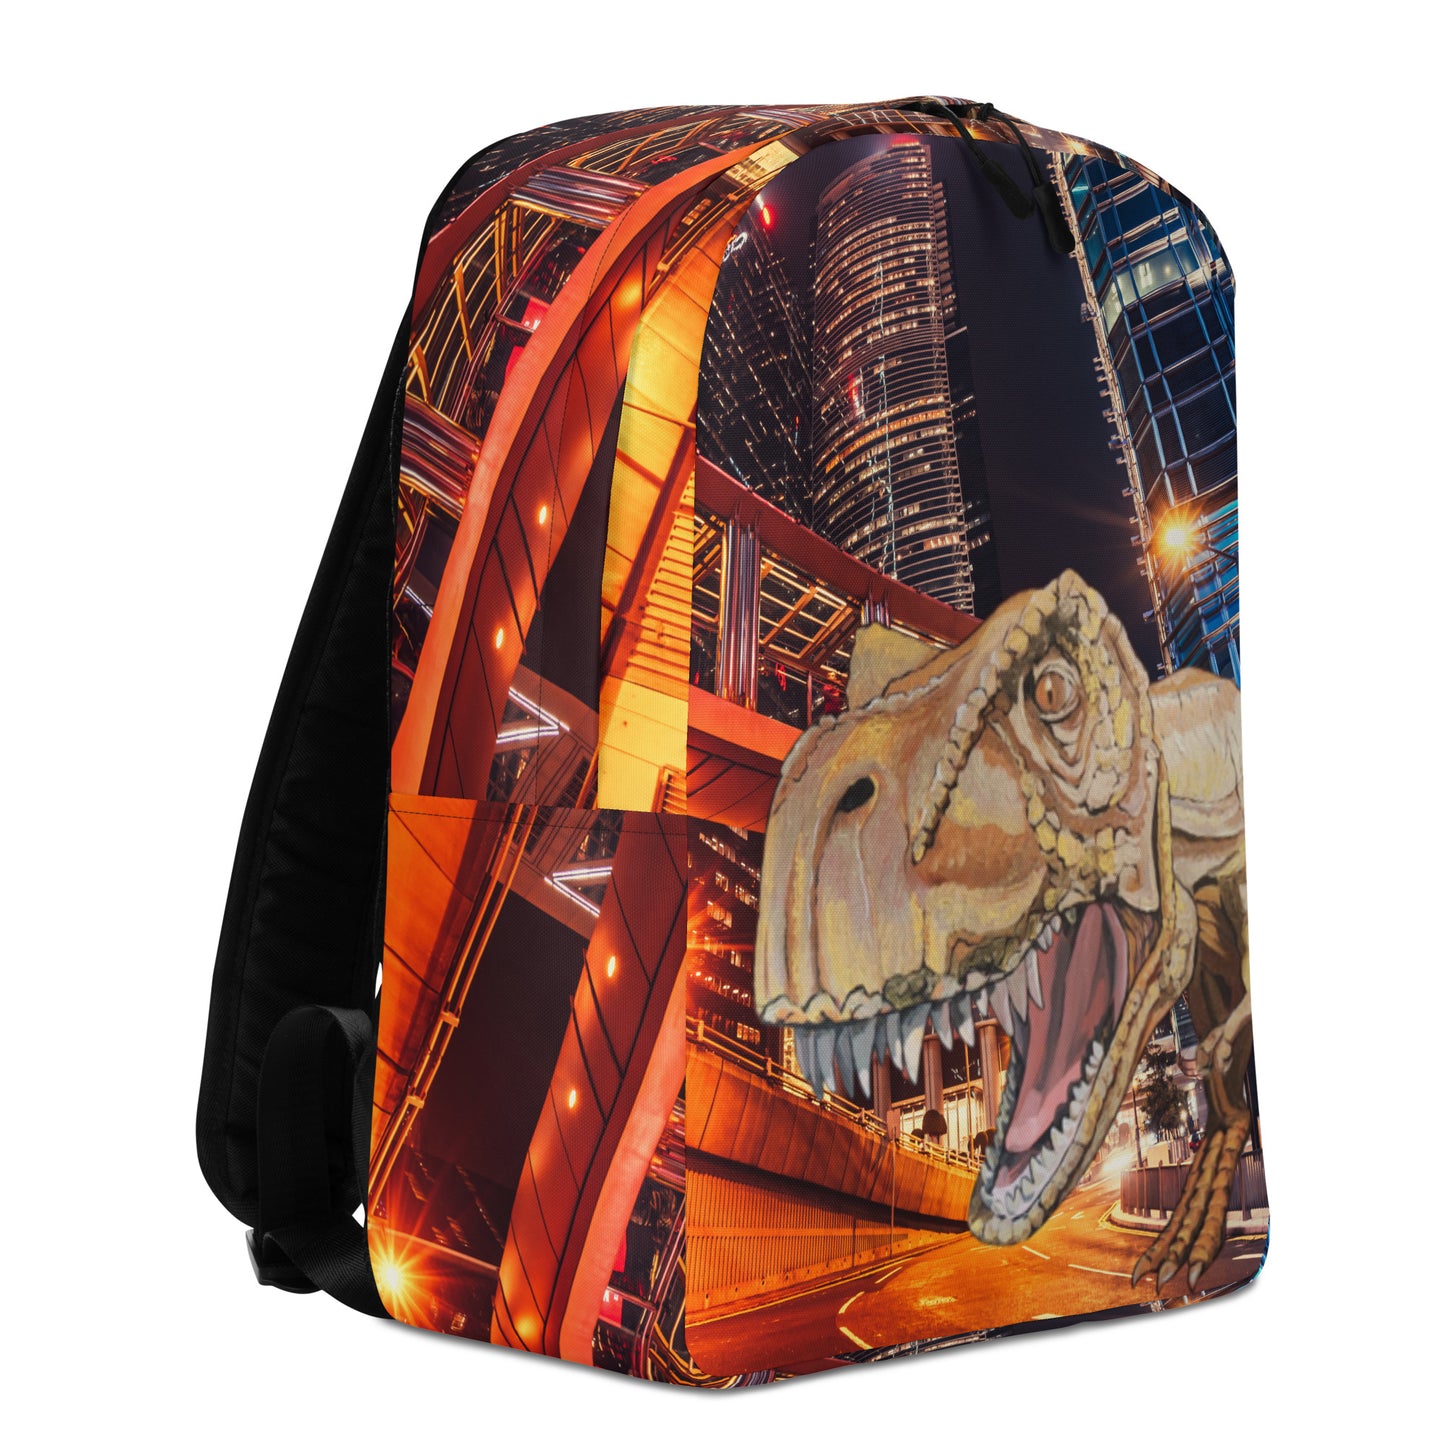 T-Rex in Gold in the City Minimalist Backpack